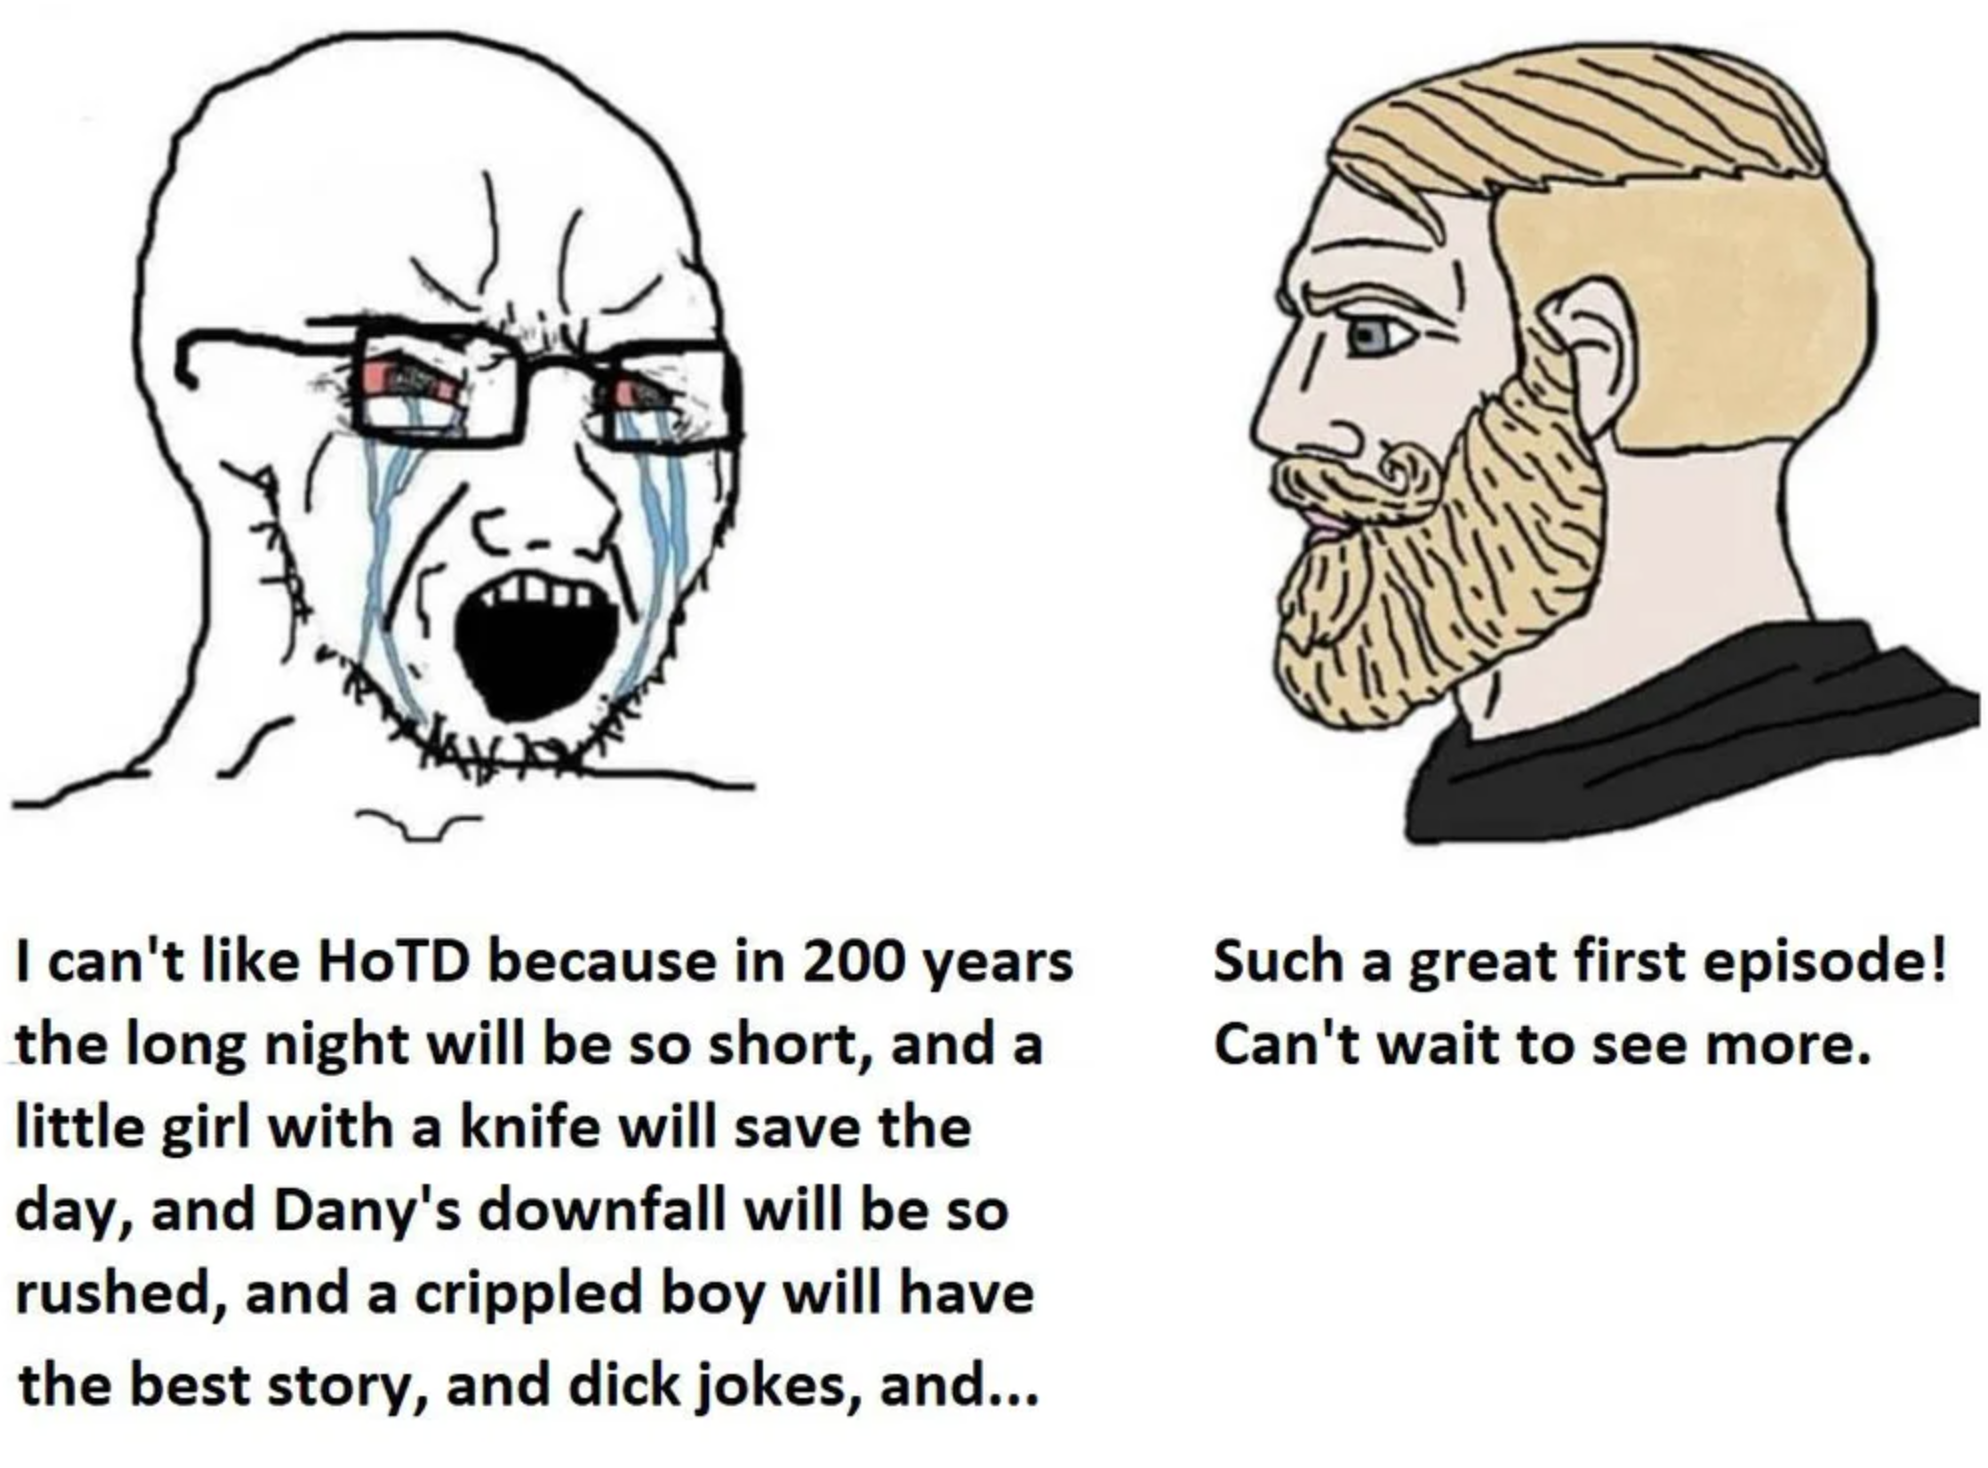 cartoon - I can't Hotd because in 200 years the long night will be so short, and a little girl with a knife will save the day, and Dany's downfall will be so rushed, and a crippled boy will have the best story, and dick jokes, and... Such a great first ep